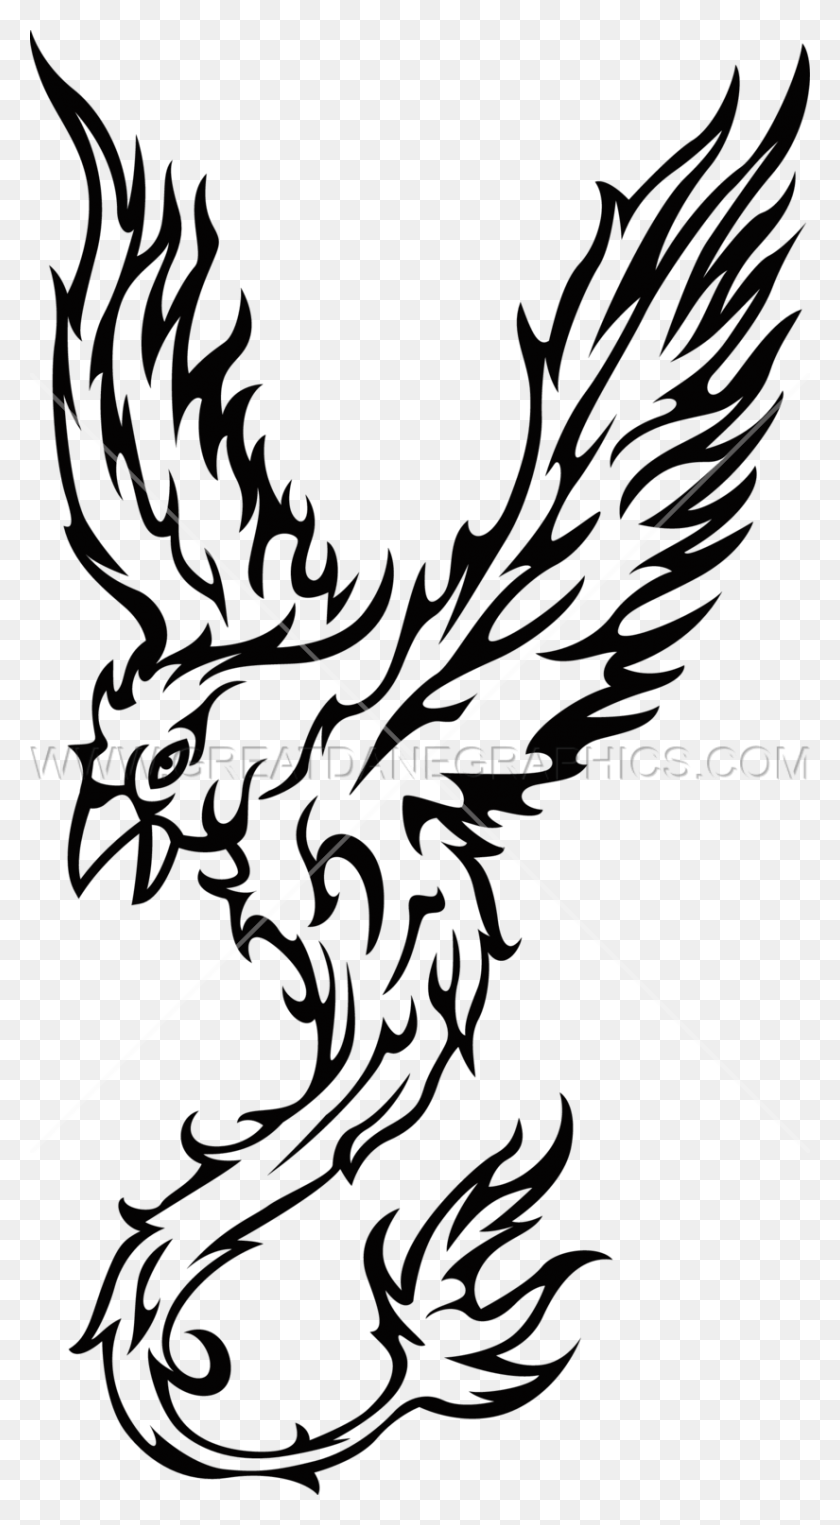 825x1550 Phoenix Production Ready Artwork For T Shirt Printing - Phoenix Clipart Black And White